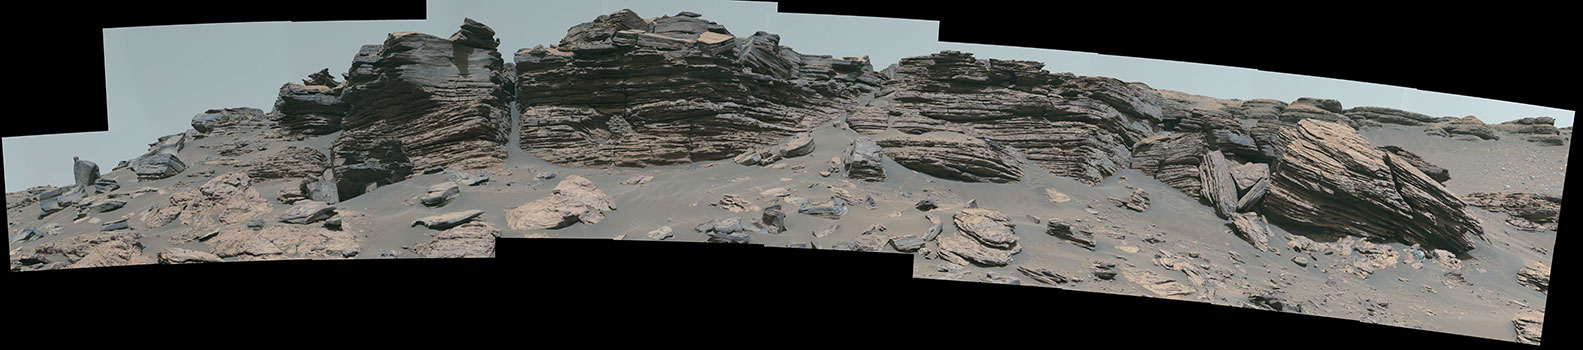 NASA’s Perseverance Mars rover used its Mastcam-Z camera to capture this rocky hilltop nicknamed “Rockytop” 